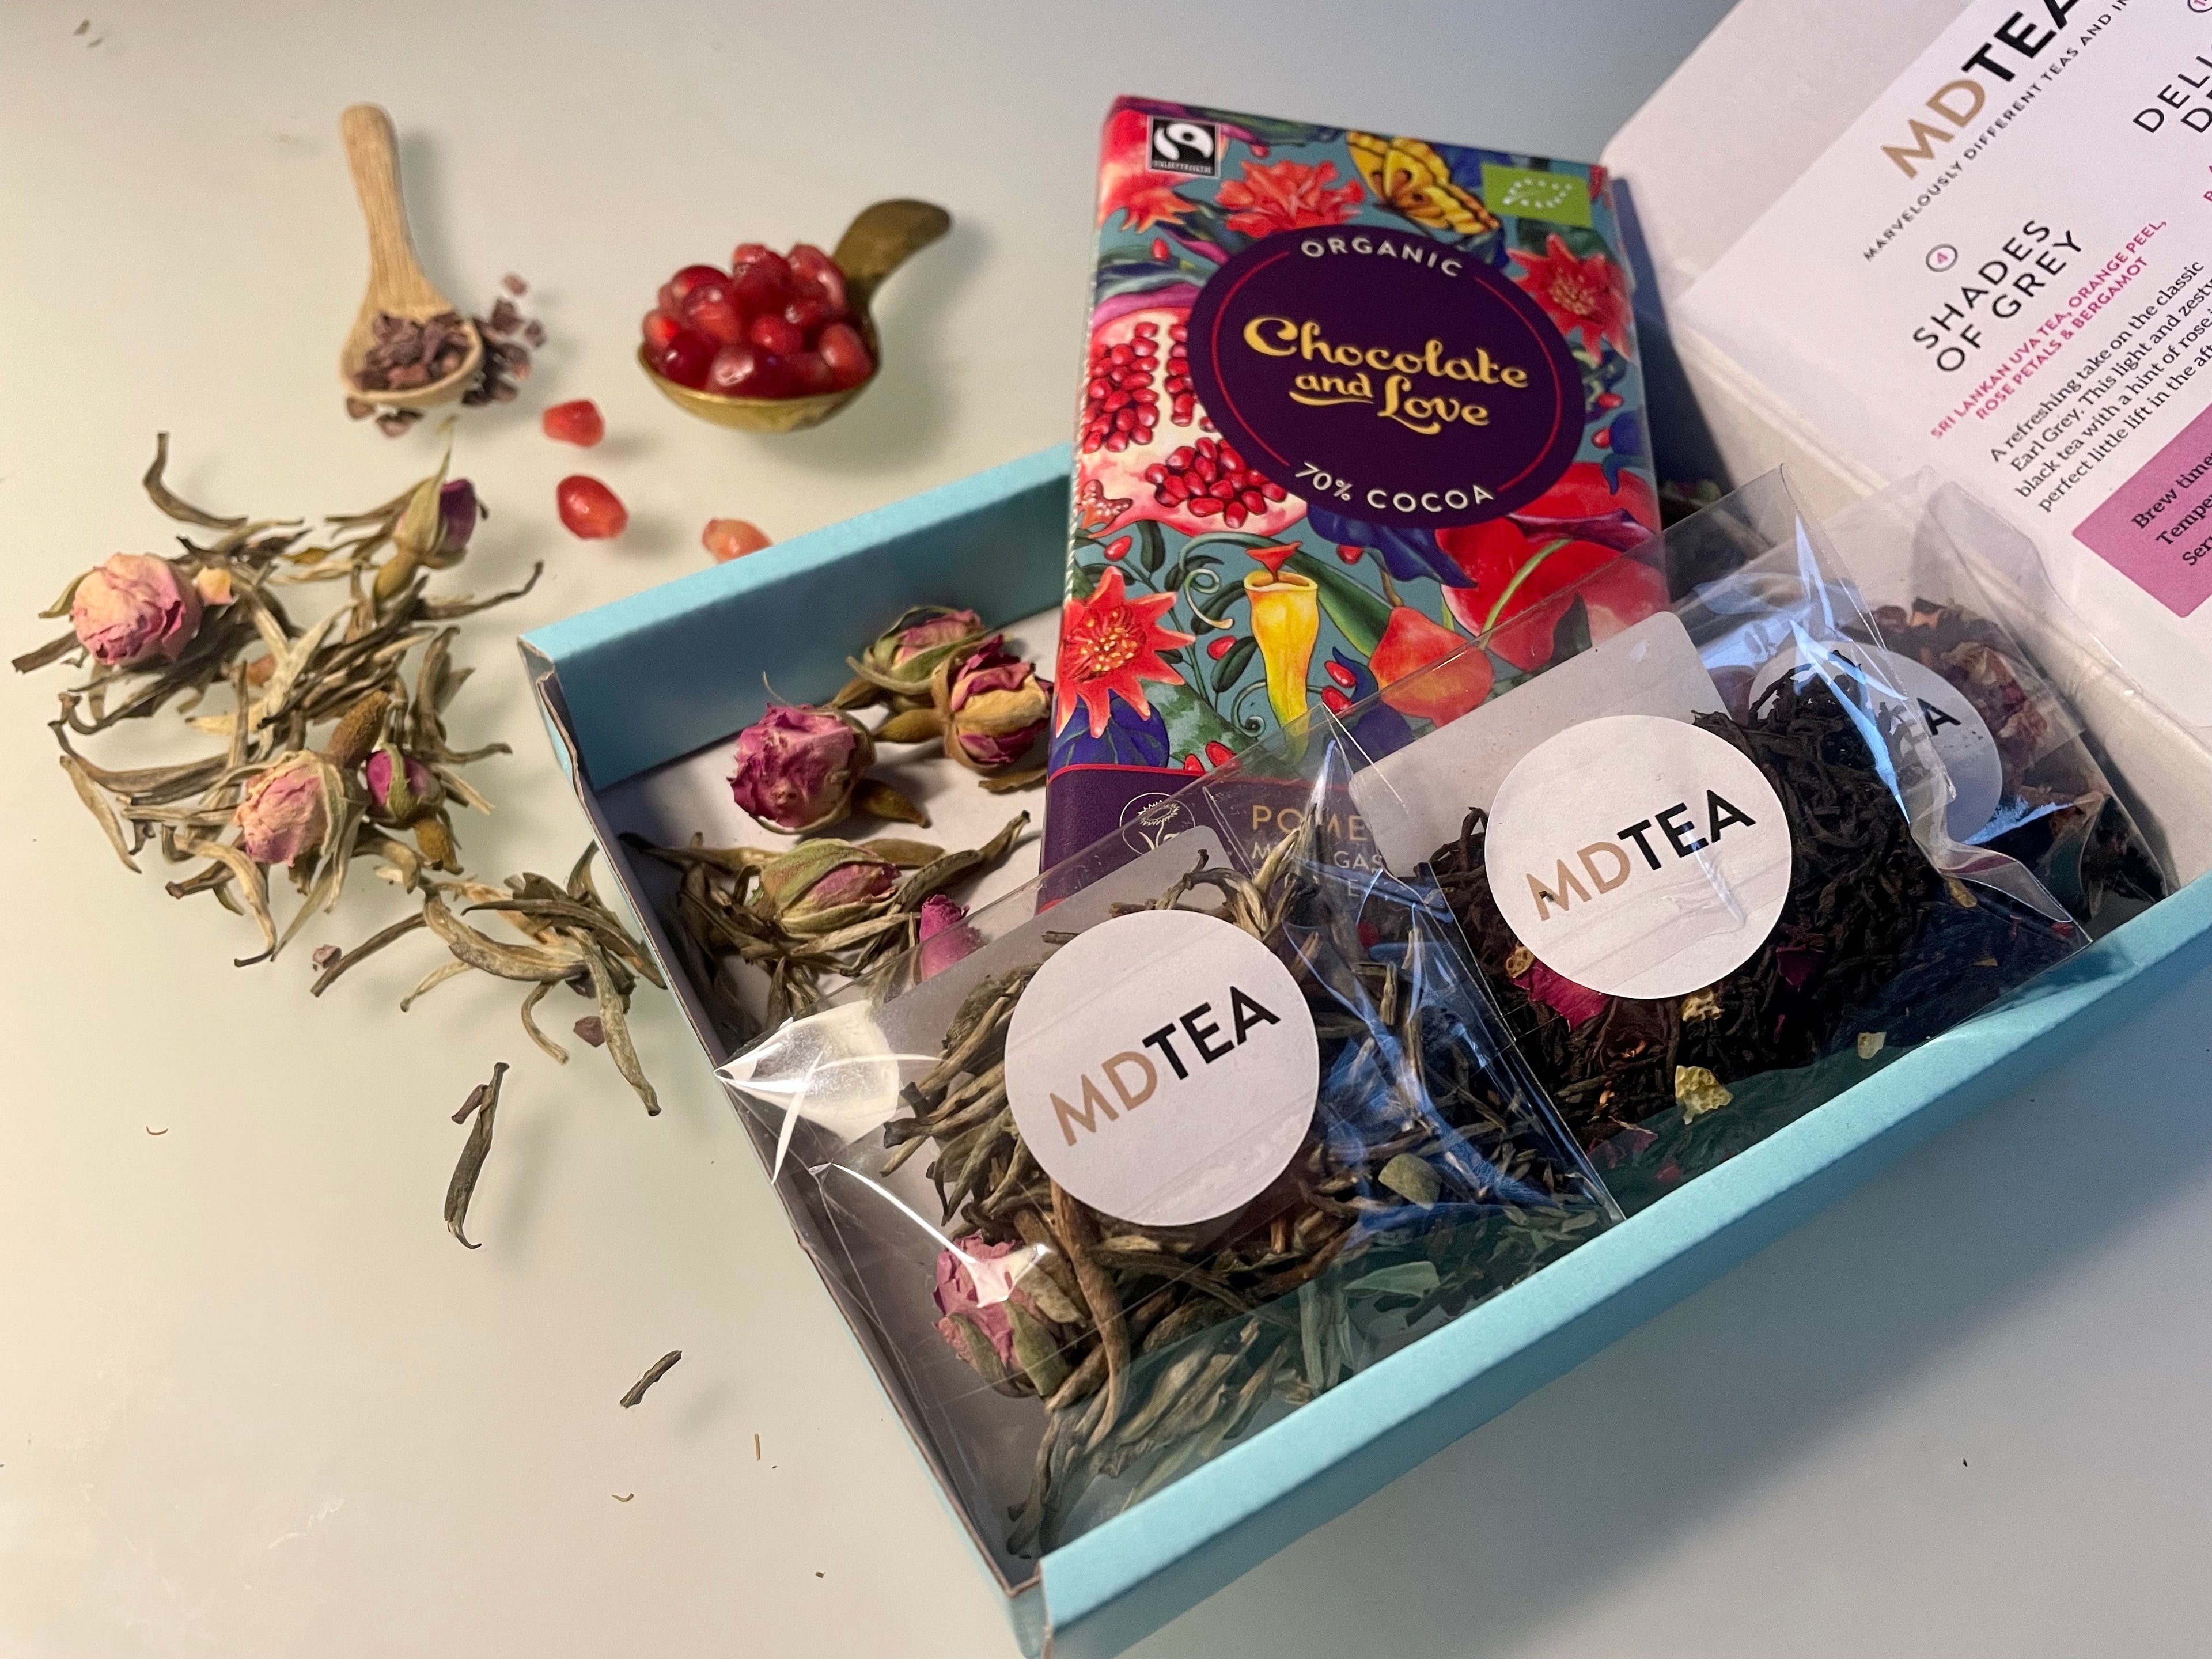 The Love Box – treat someone special to tea and chocolate | MDTEA